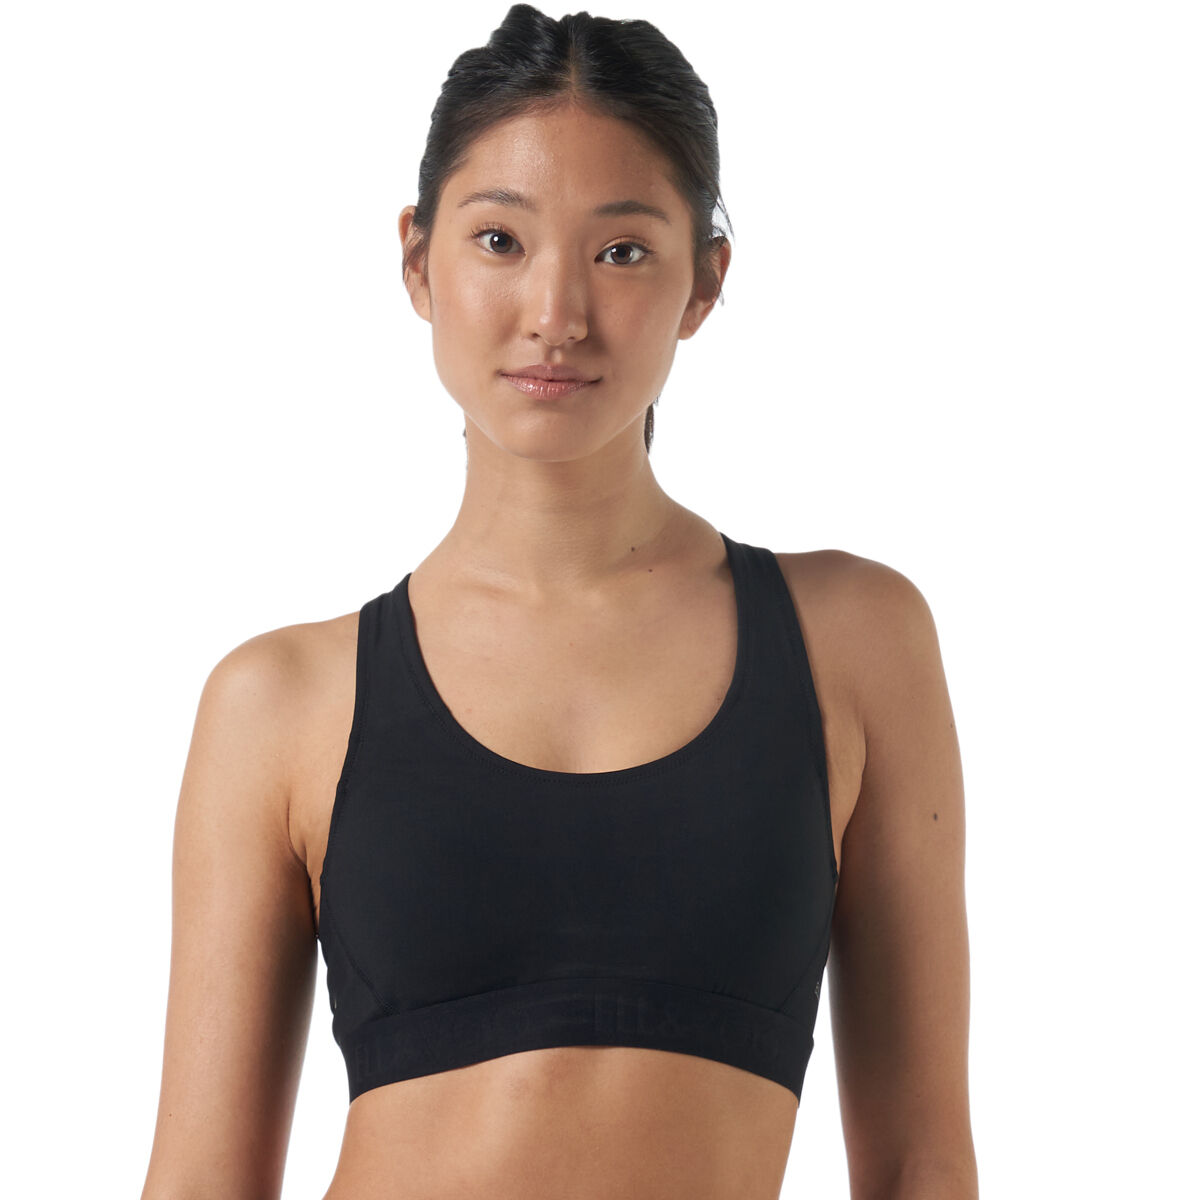 RUNNING BARE WMNS MOVE SPORTS BRA - Totally Sports & Surf